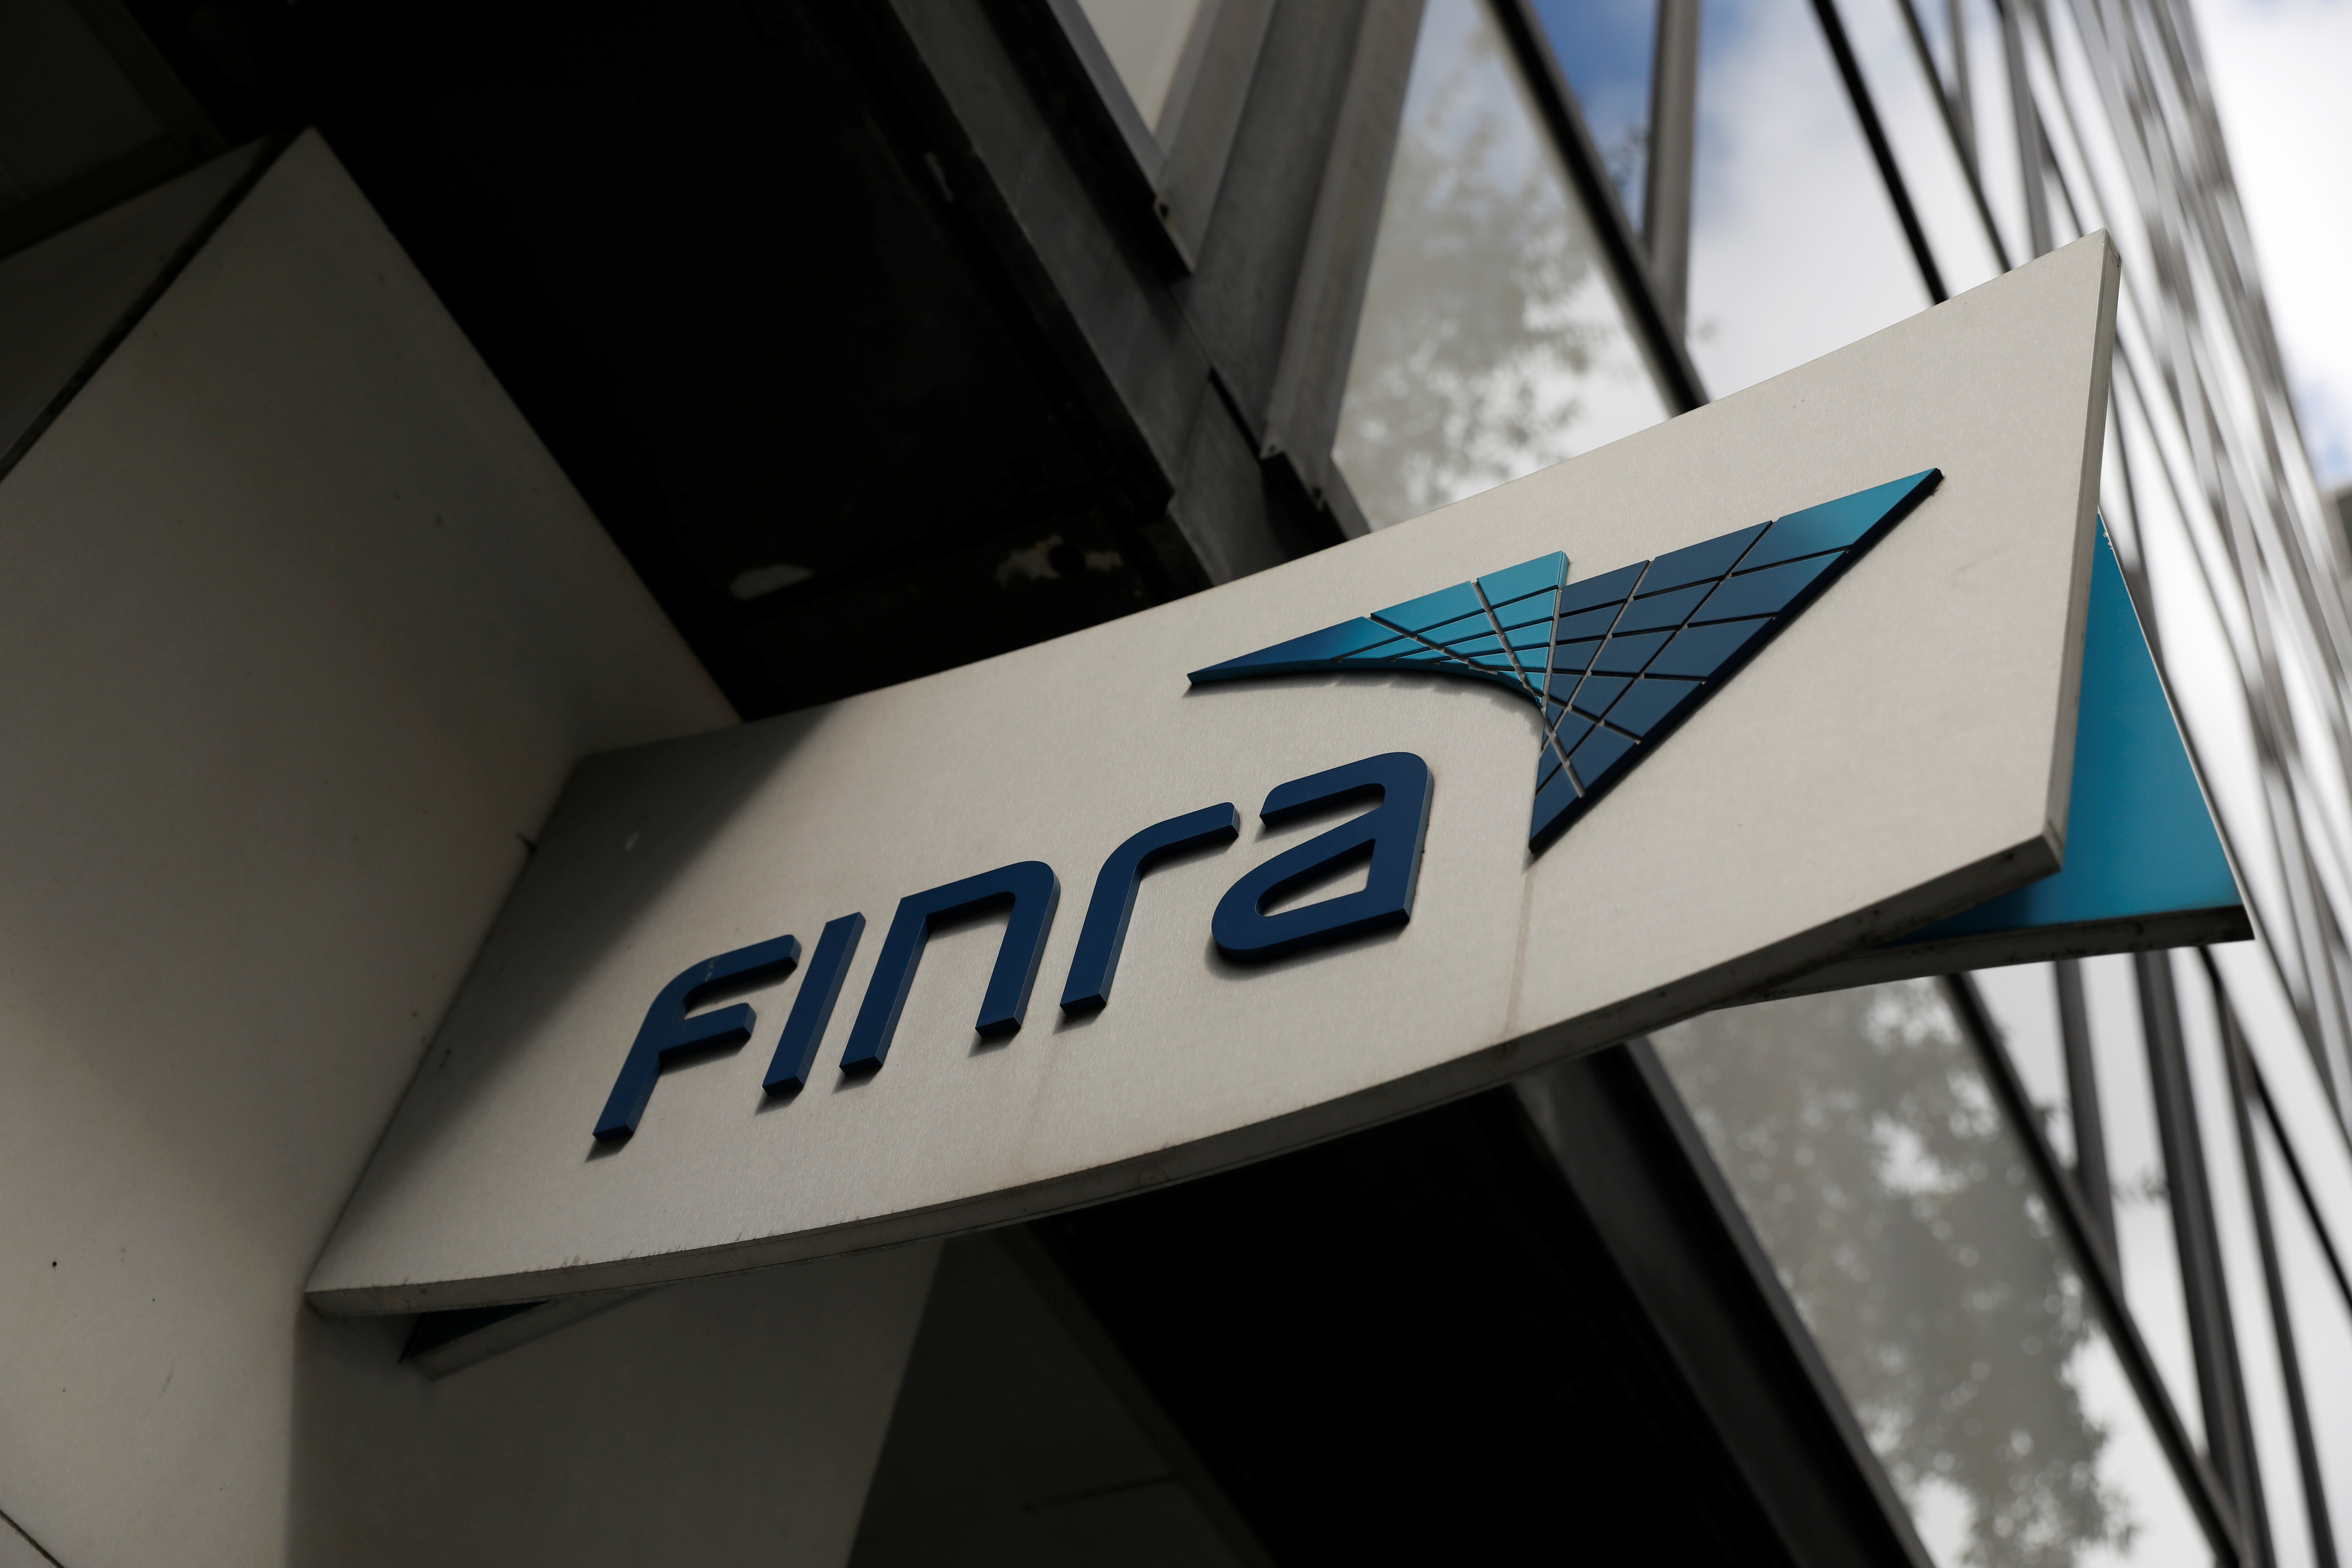 Signage is seen at the Financial Industry Regulatory Authority (FINRA) headquarters in Washington, D.C.